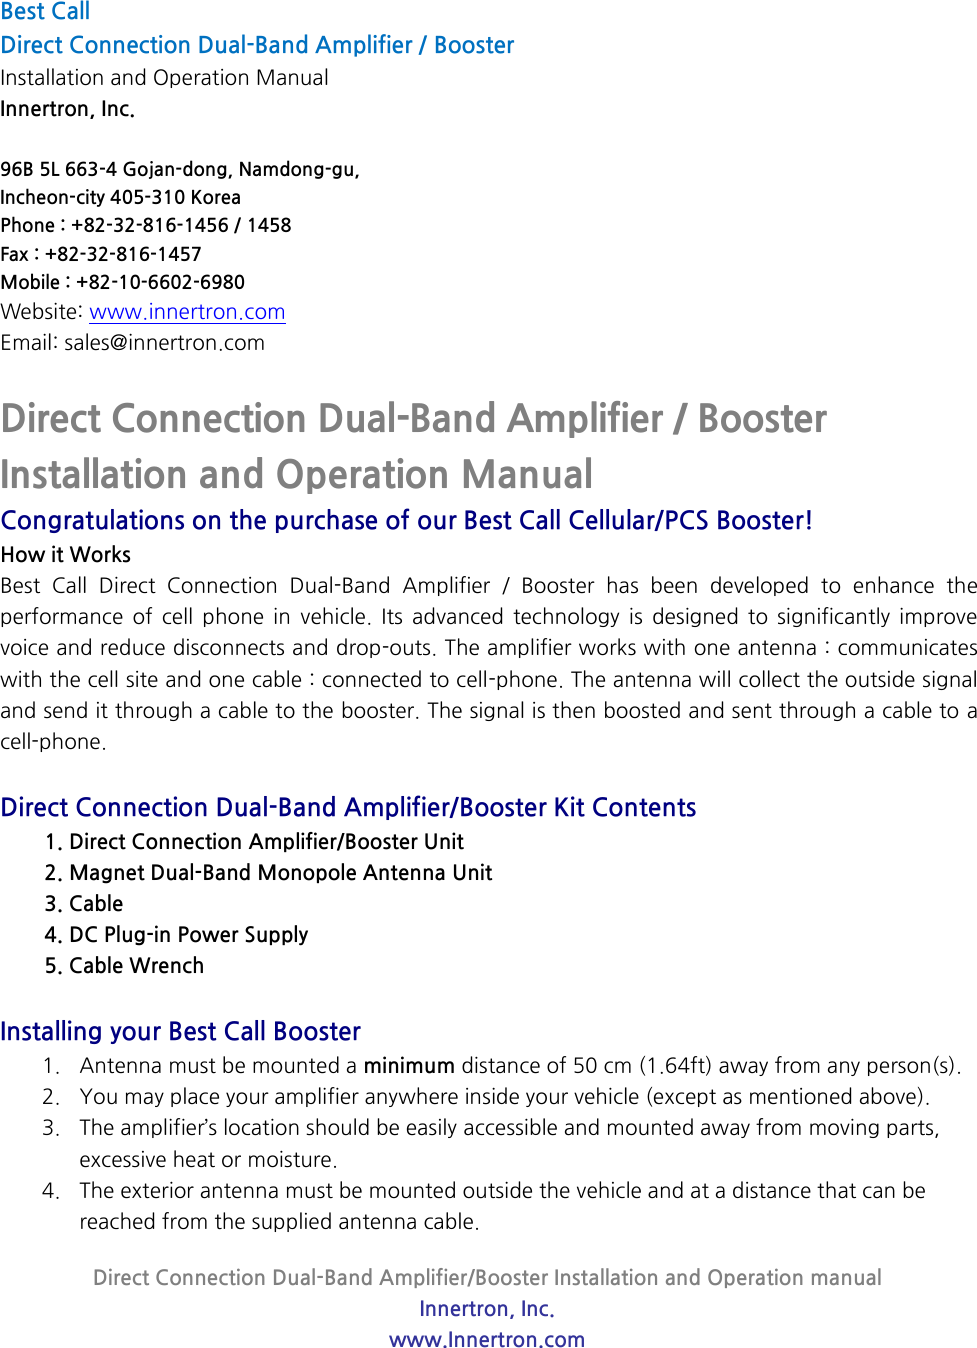 Direct Connection Dual-Band Amplifier/Booster Installation and Operation manual Innertron, Inc. www.Innertron.com  Best Call   Direct Connection Dual-Band Amplifier / Booster Installation and Operation Manual Innertron, Inc.  96B 5L 663-4 Gojan-dong, Namdong-gu, Incheon-city 405-310 Korea Phone : +82-32-816-1456 / 1458 Fax : +82-32-816-1457 Mobile : +82-10-6602-6980 Website: www.innertron.com Email: sales@innertron.com  Direct Connection Dual-Band Amplifier / Booster Installation and Operation Manual Congratulations on the purchase of our Best Call Cellular/PCS Booster! How it Works   Best  Call  Direct  Connection  Dual-Band  Amplifier  /  Booster  has  been  developed  to  enhance  the performance  of  cell  phone  in  vehicle.  Its  advanced  technology  is  designed  to  significantly  improve voice and reduce disconnects and drop-outs. The amplifier works with one antenna : communicates with the cell site and one cable : connected to cell-phone. The antenna will collect the outside signal and send it through a cable to the booster. The signal is then boosted and sent through a cable to a cell-phone.  Direct Connection Dual-Band Amplifier/Booster Kit Contents 1. Direct Connection Amplifier/Booster Unit 2. Magnet Dual-Band Monopole Antenna Unit 3. Cable 4. DC Plug-in Power Supply 5. Cable Wrench  Installing your Best Call Booster 1. Antenna must be mounted a minimum distance of 50 cm (1.64ft) away from any person(s). 2. You may place your amplifier anywhere inside your vehicle (except as mentioned above).   3. The amplifier’s location should be easily accessible and mounted away from moving parts, excessive heat or moisture. 4. The exterior antenna must be mounted outside the vehicle and at a distance that can be reached from the supplied antenna cable. 